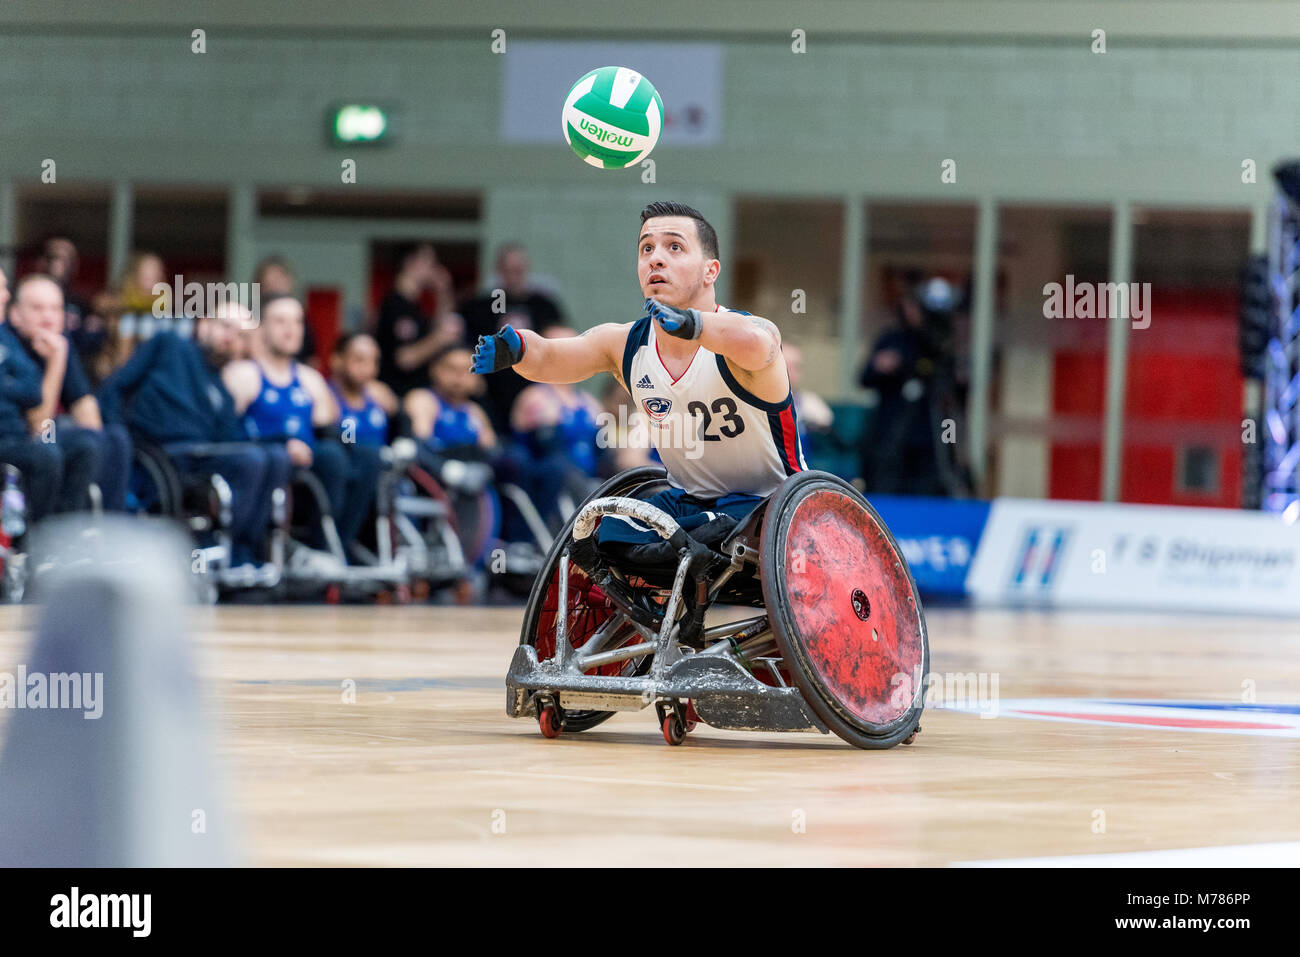 Leicester, UK, 9th Mar, 2018. Wheelchair Rugby: Quad Nations GBR vs USA at Leicester Arena.   Day one, GBR vs USA Wheelchair Rugby.  USA's Alejandro Pabon (23) chasis the ball during play. (c) pmgimaging /Alamy Live News Stock Photo